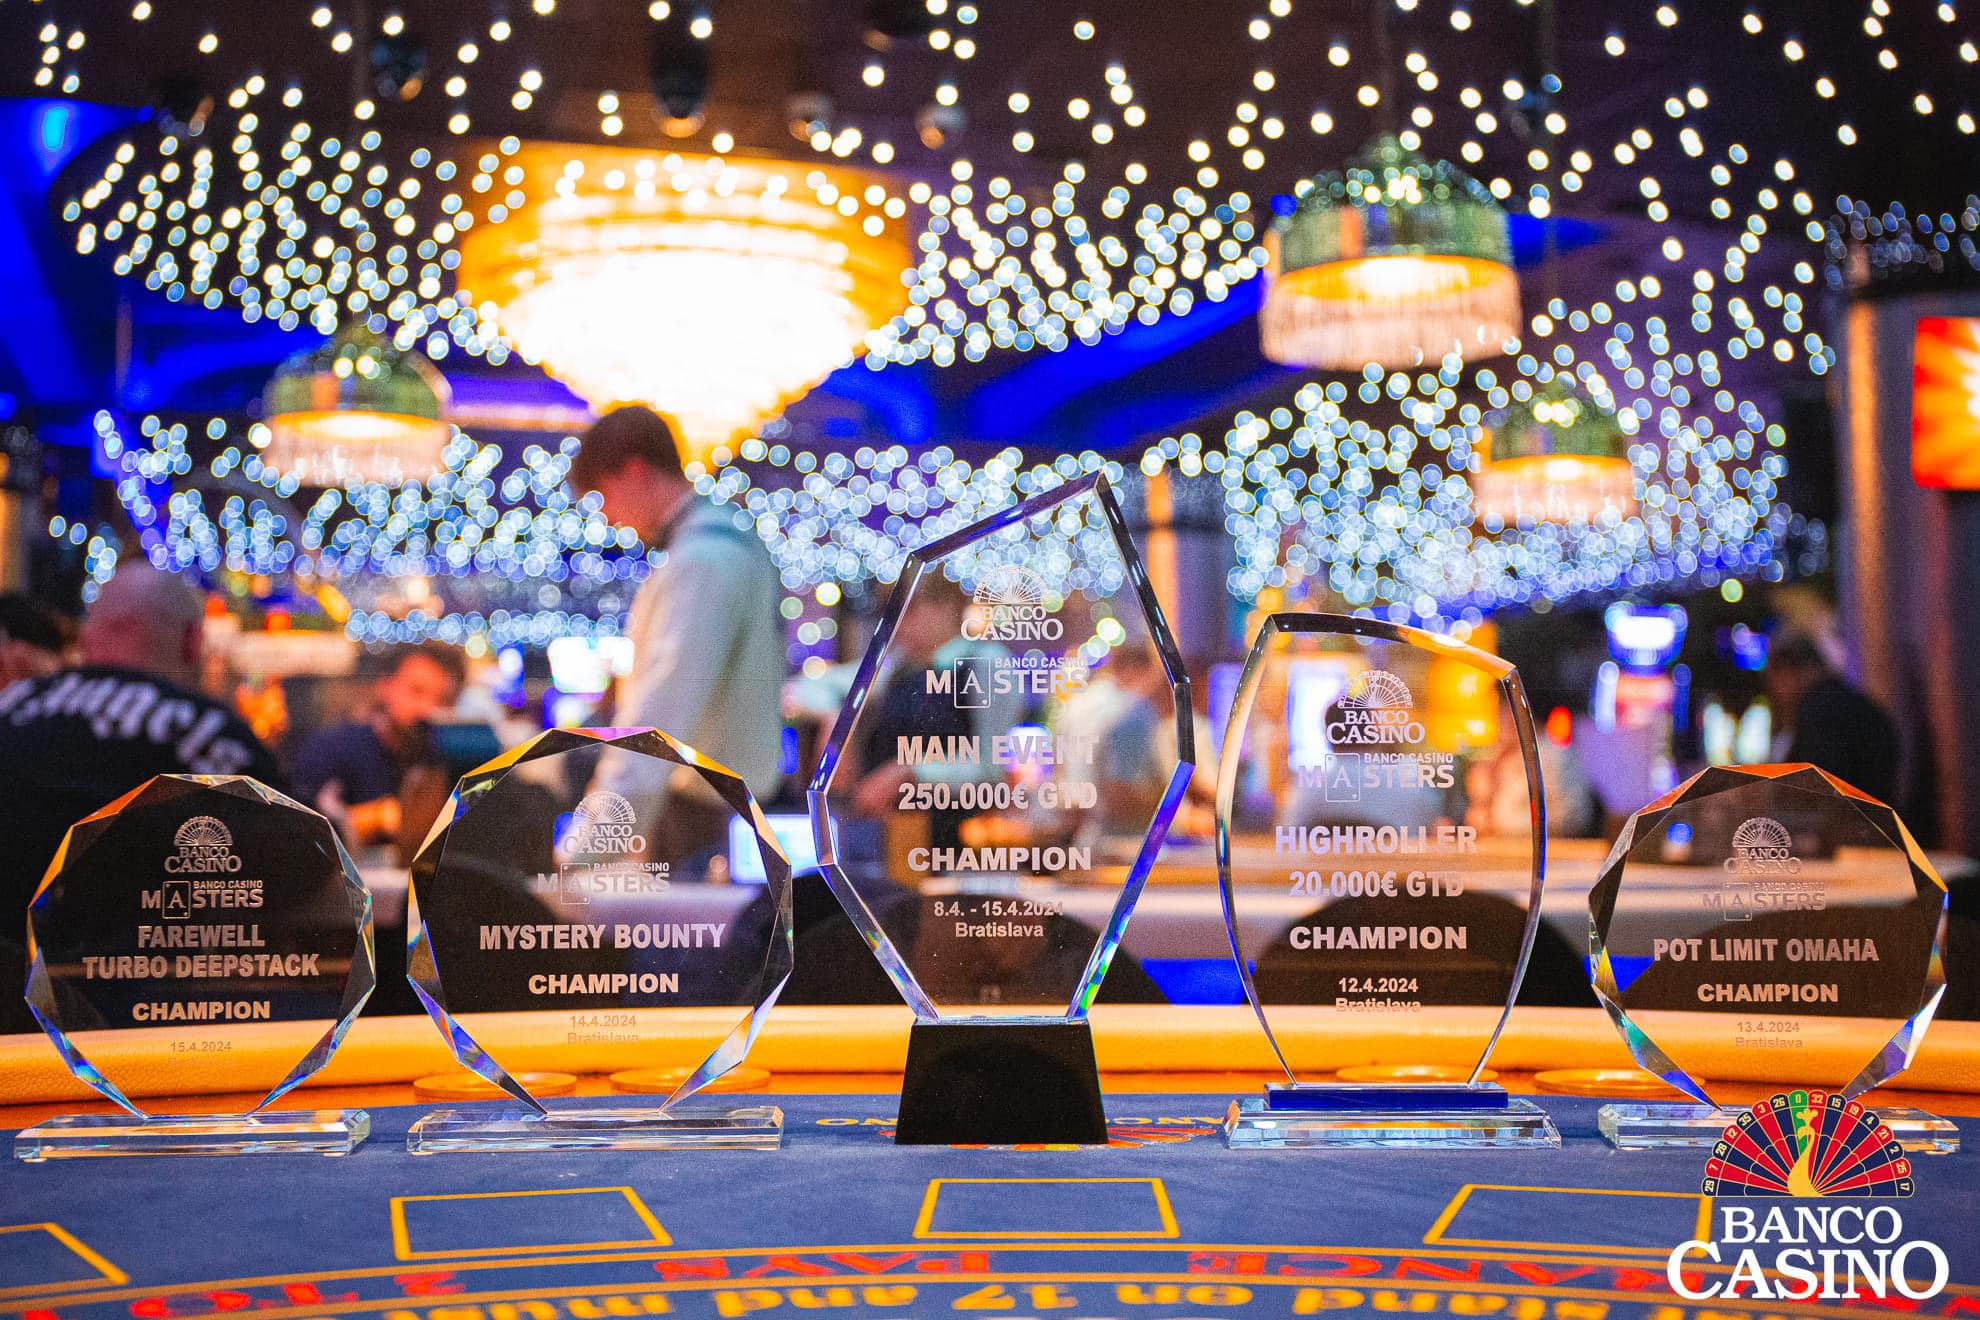 The legendary Banco Casino Masters has begun writing its 38th chapter